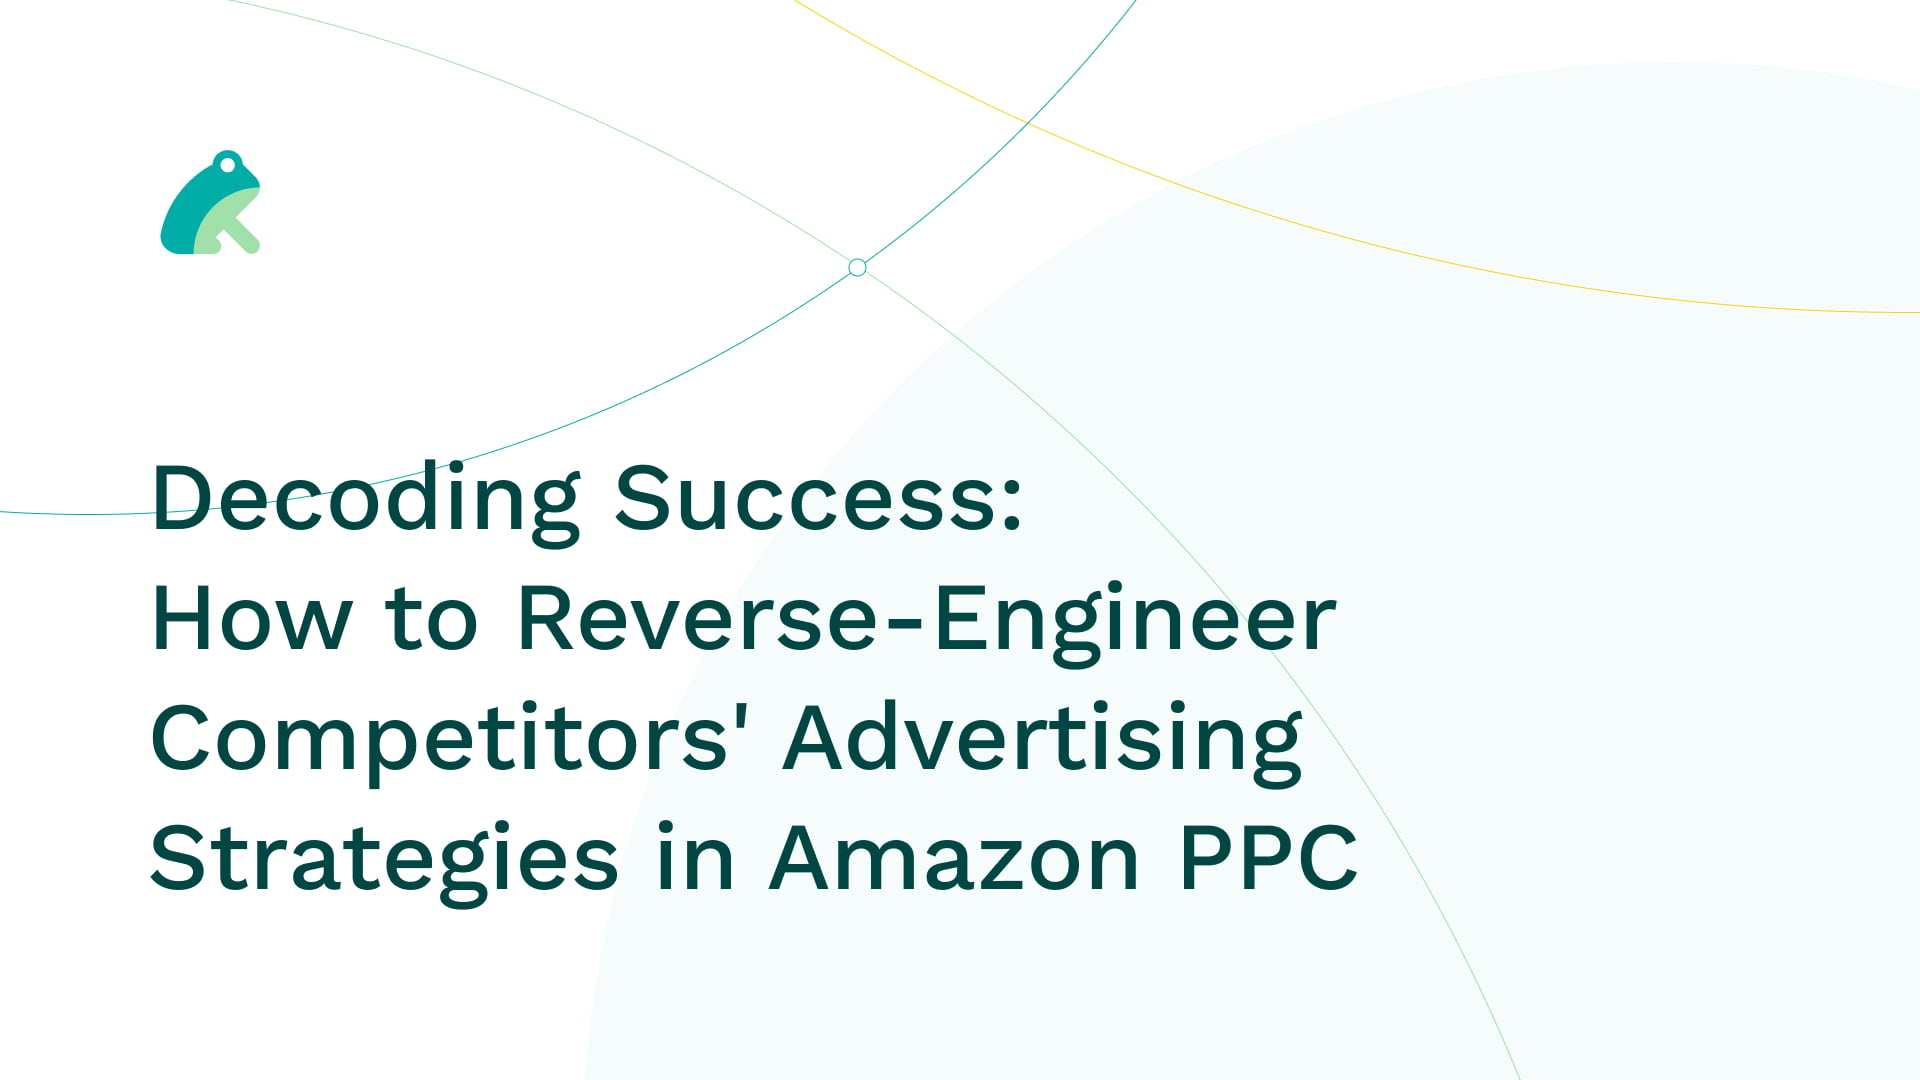 Decoding Success: How to Reverse-Engineer Competitors' Advertising Strategies in Amazon PPC